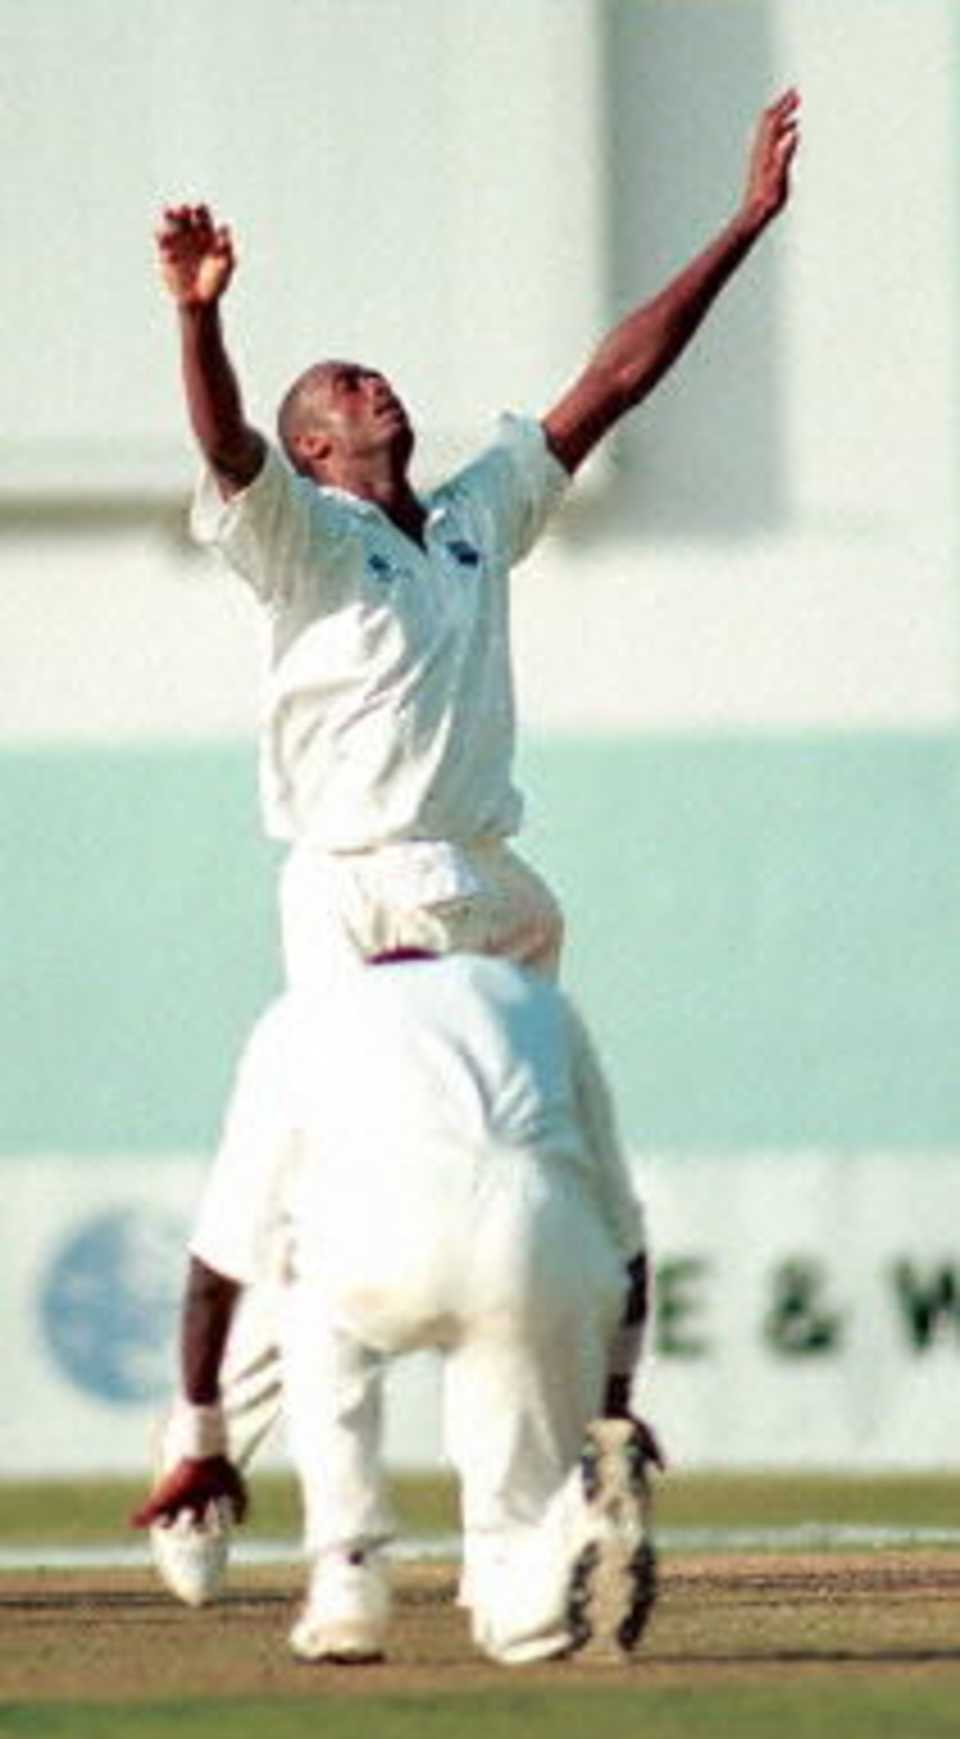 West Indies fast bowler Courtney Walsh celebrates after taking his 435th wicket against Zimbabwe 27 March, 2000 in Kingston, Jamaica. Walsh broke the record held by India's Kapil Dev for most number of wickets